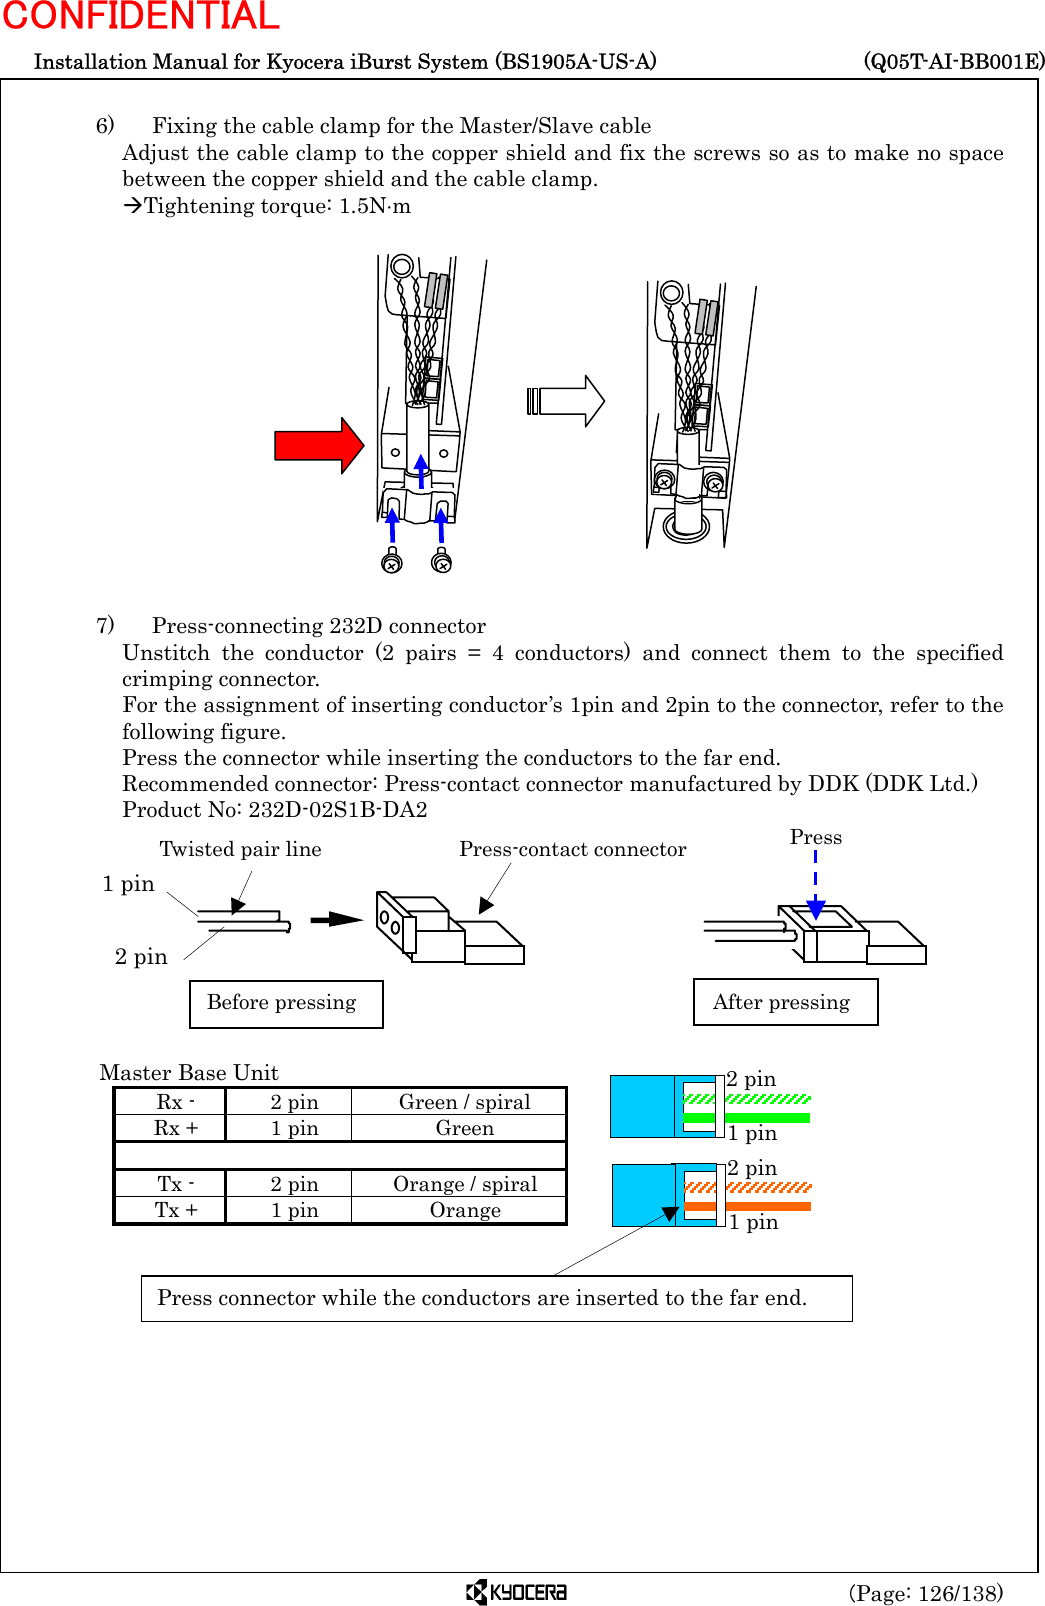  Installation Manual for Kyocera iBurst System (BS1905A-US-A)     (Q05T-AI-BB001E) (Page: 126/138) CONFIDENTIAL  6)    Fixing the cable clamp for the Master/Slave cable Adjust the cable clamp to the copper shield and fix the screws so as to make no space between the copper shield and the cable clamp. ÆTightening torque: 1.5N⋅m                7)    Press-connecting 232D connector Unstitch the conductor (2 pairs = 4 conductors) and connect them to the specified crimping connector. For the assignment of inserting conductor’s 1pin and 2pin to the connector, refer to the following figure. Press the connector while inserting the conductors to the far end. Recommended connector: Press-contact connector manufactured by DDK (DDK Ltd.) Product No: 232D-02S1B-DA2                Master Base Unit Rx -  2 pin  Green / spiral Rx +  1 pin  Green     Tx -  2 pin  Orange / spiral Tx +  1 pin  Orange     Twisted pair line Press-contact connector2 pin1 pinBefore pressing After pressingPress1 pin 2 pin 1 pin 2 pin Press connector while the conductors are inserted to the far end. 